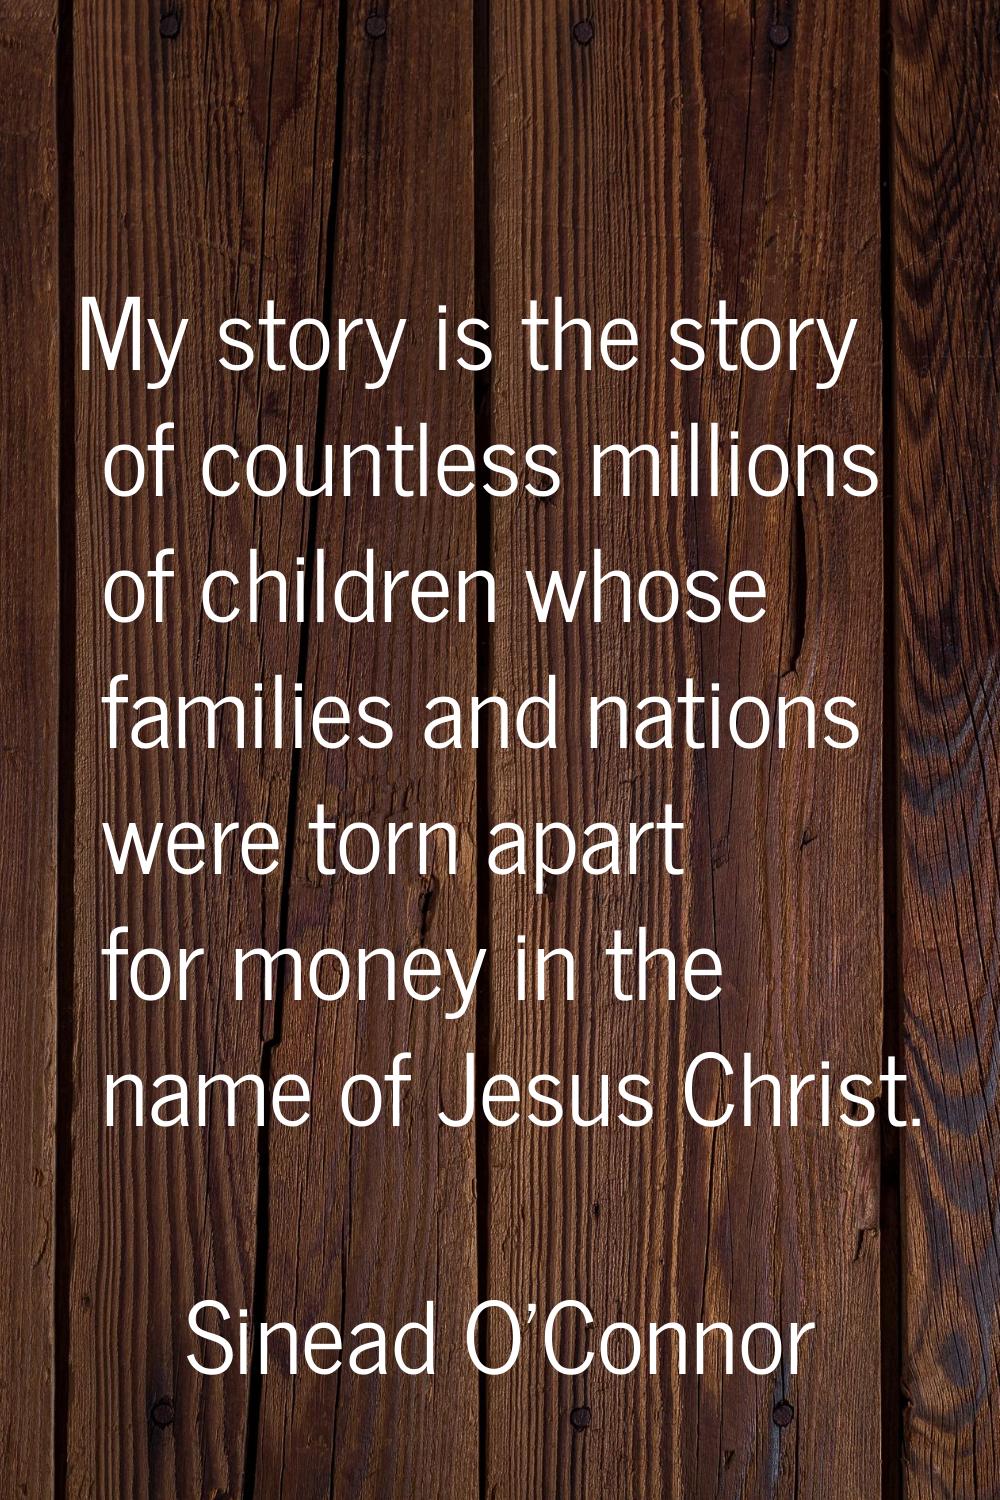 My story is the story of countless millions of children whose families and nations were torn apart 